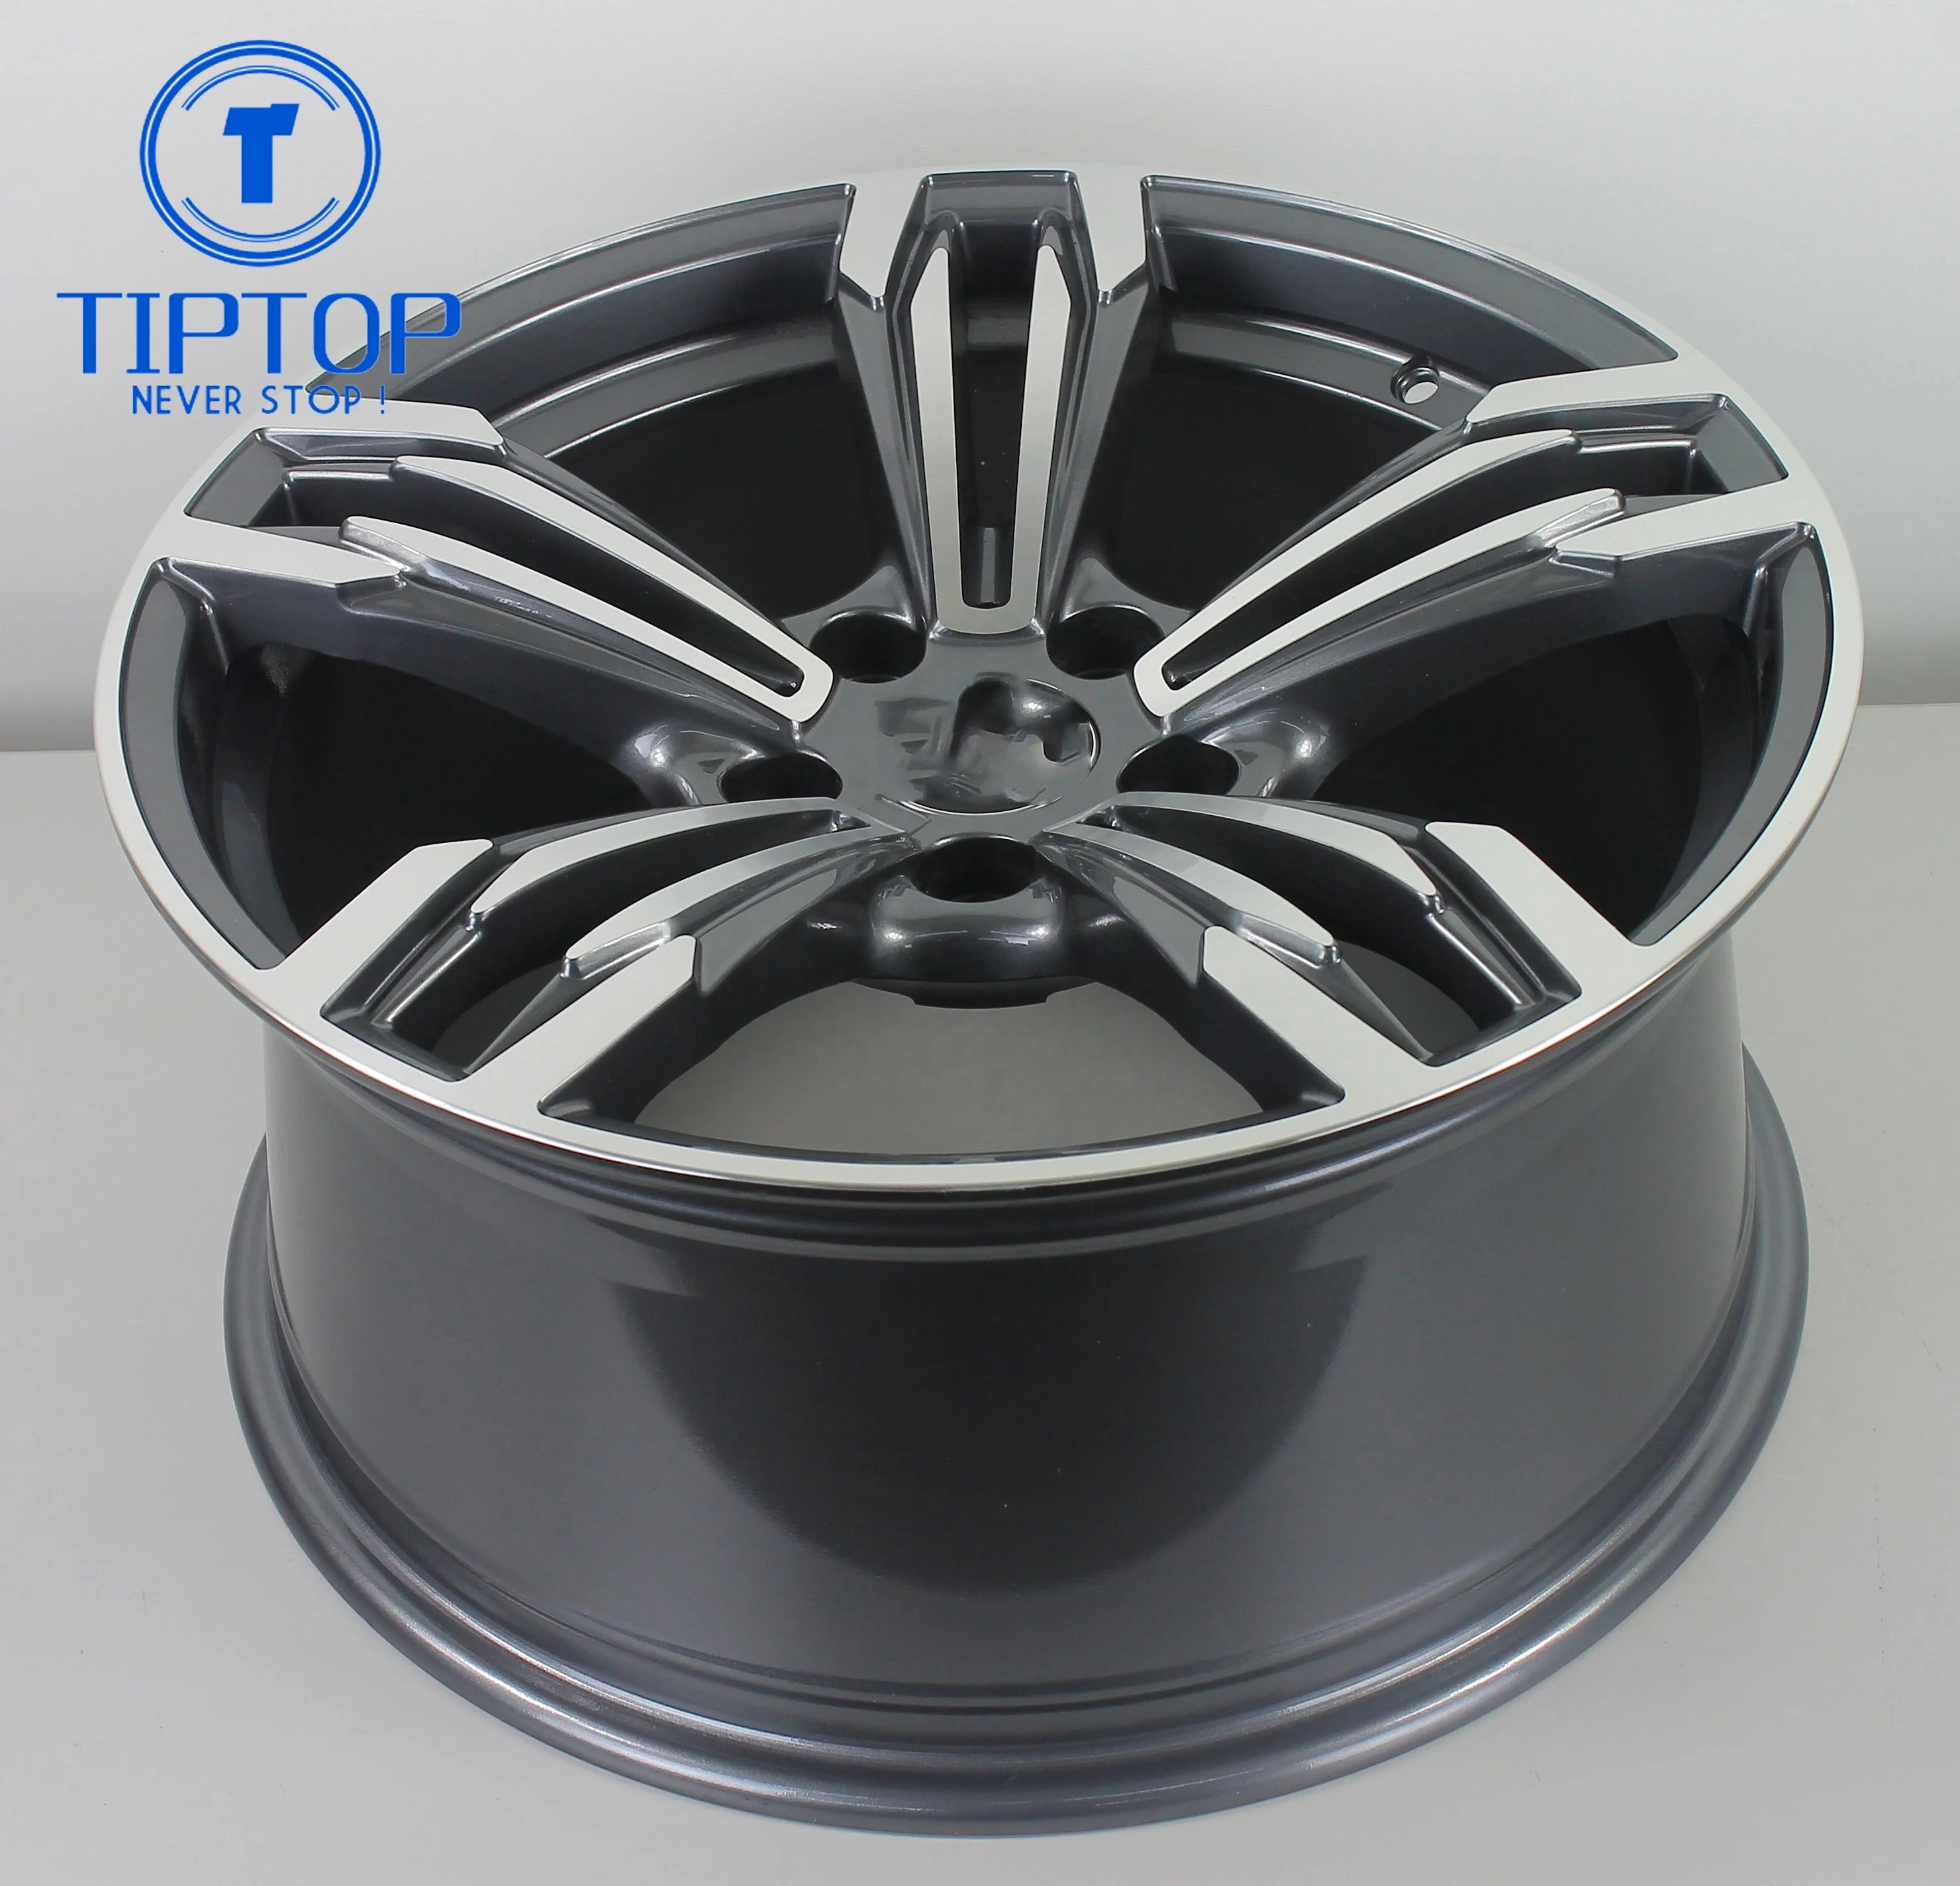 
High quality low price 16 inch hot sale alloy wheel fit for BM car wheel 